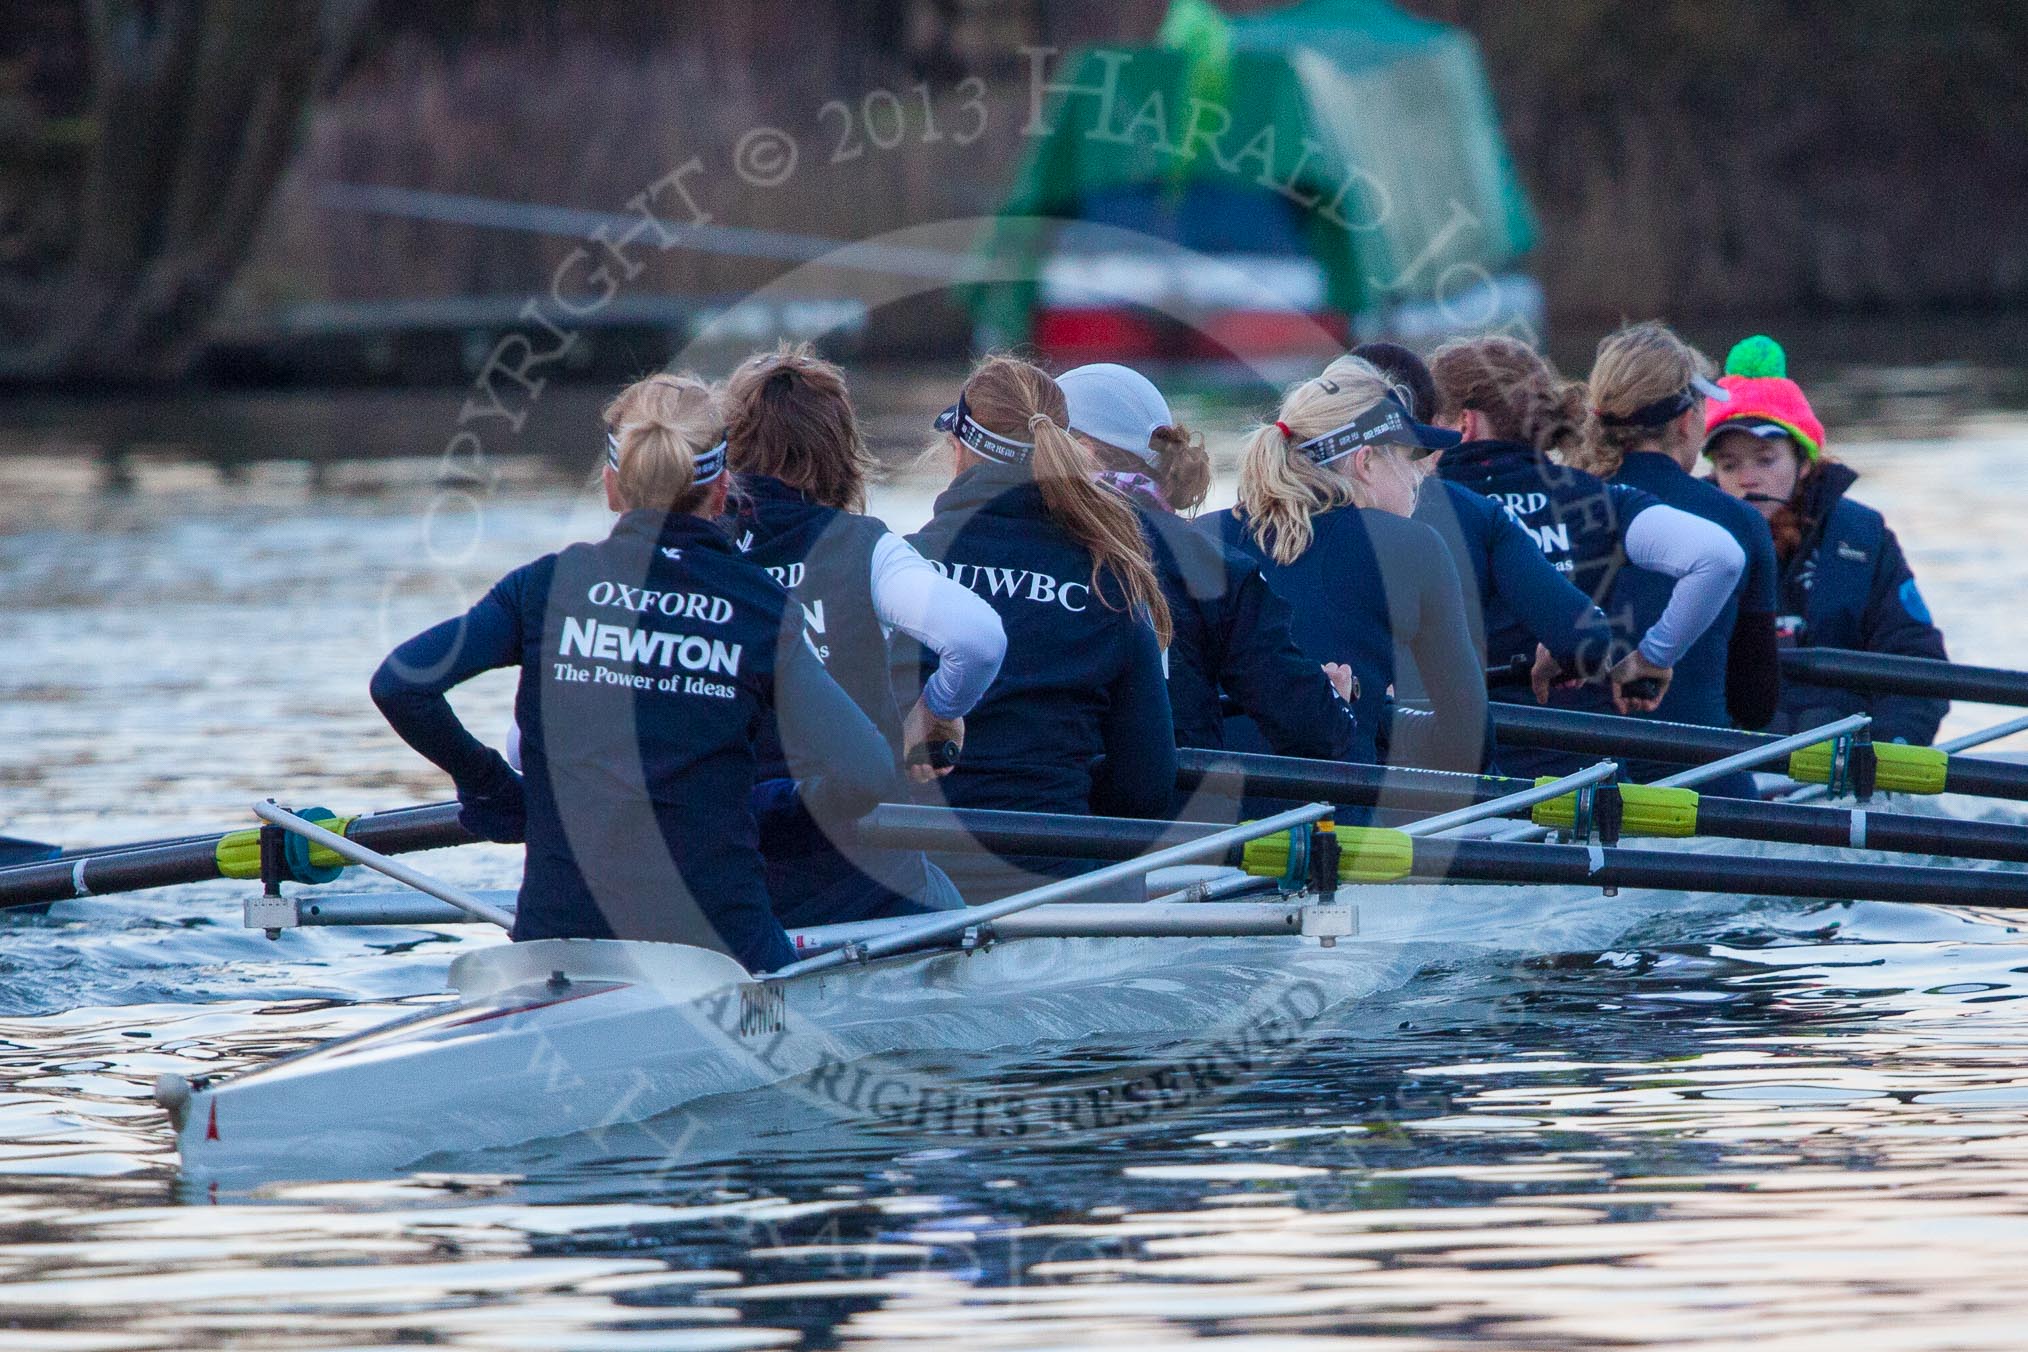 The Boat Race season 2013 - OUWBC training: In the OUWBC Blue Boat bow Mariann Novak, Alice Carrington-Windo, Mary Foord-Weston, Jo Lee, Amy Varney, Harriet Keane, Anastasia Chitty, stroke Maxie Scheske, and cox Katie Apfelbaum..
River Thames,
Wallingford,
Oxfordshire,
United Kingdom,
on 13 March 2013 at 17:48, image #183